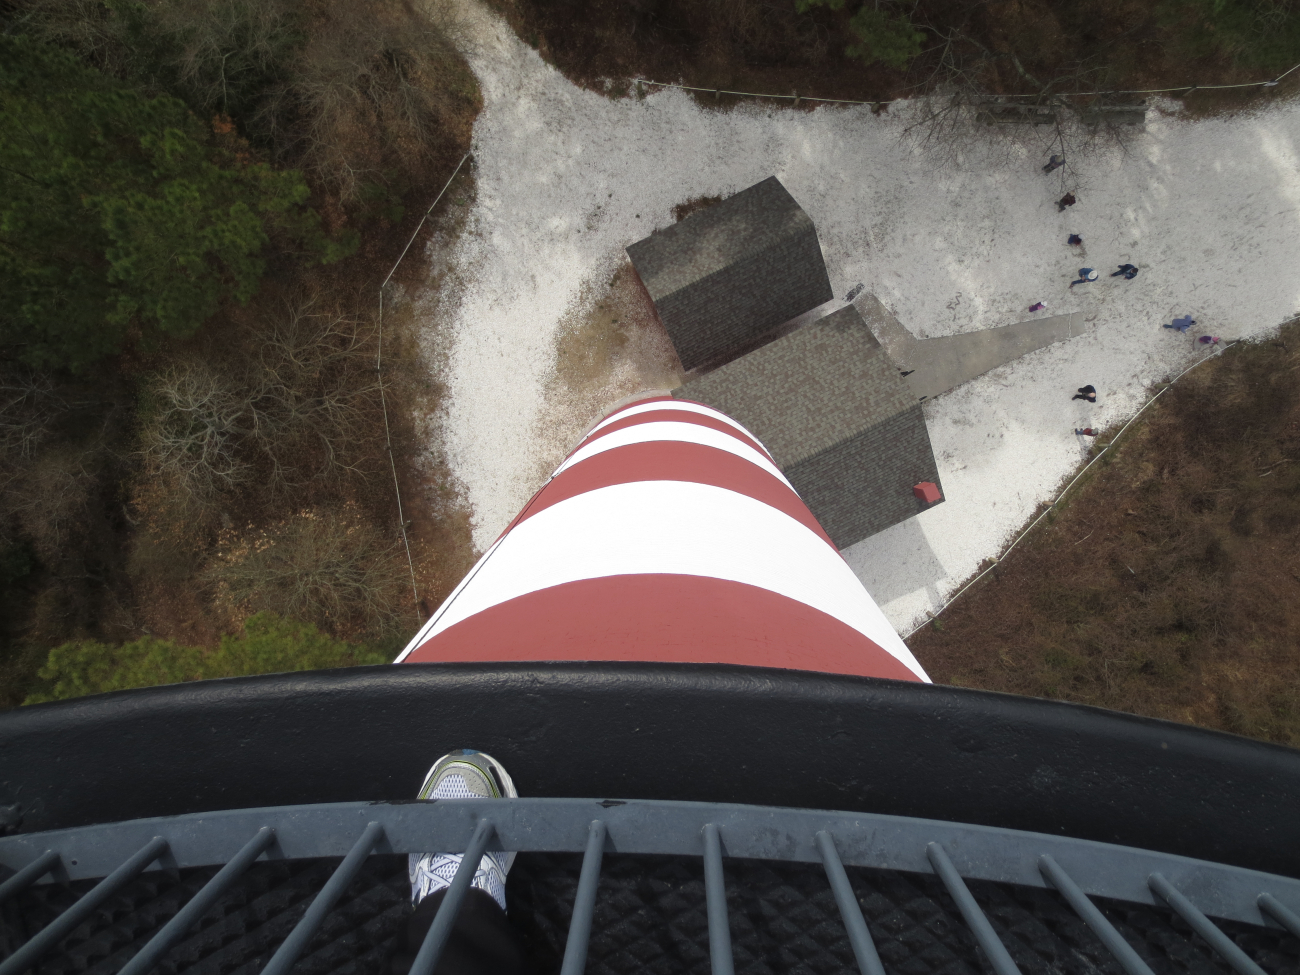 Looking down from Assateague lighthouse to the oilhouse and people below